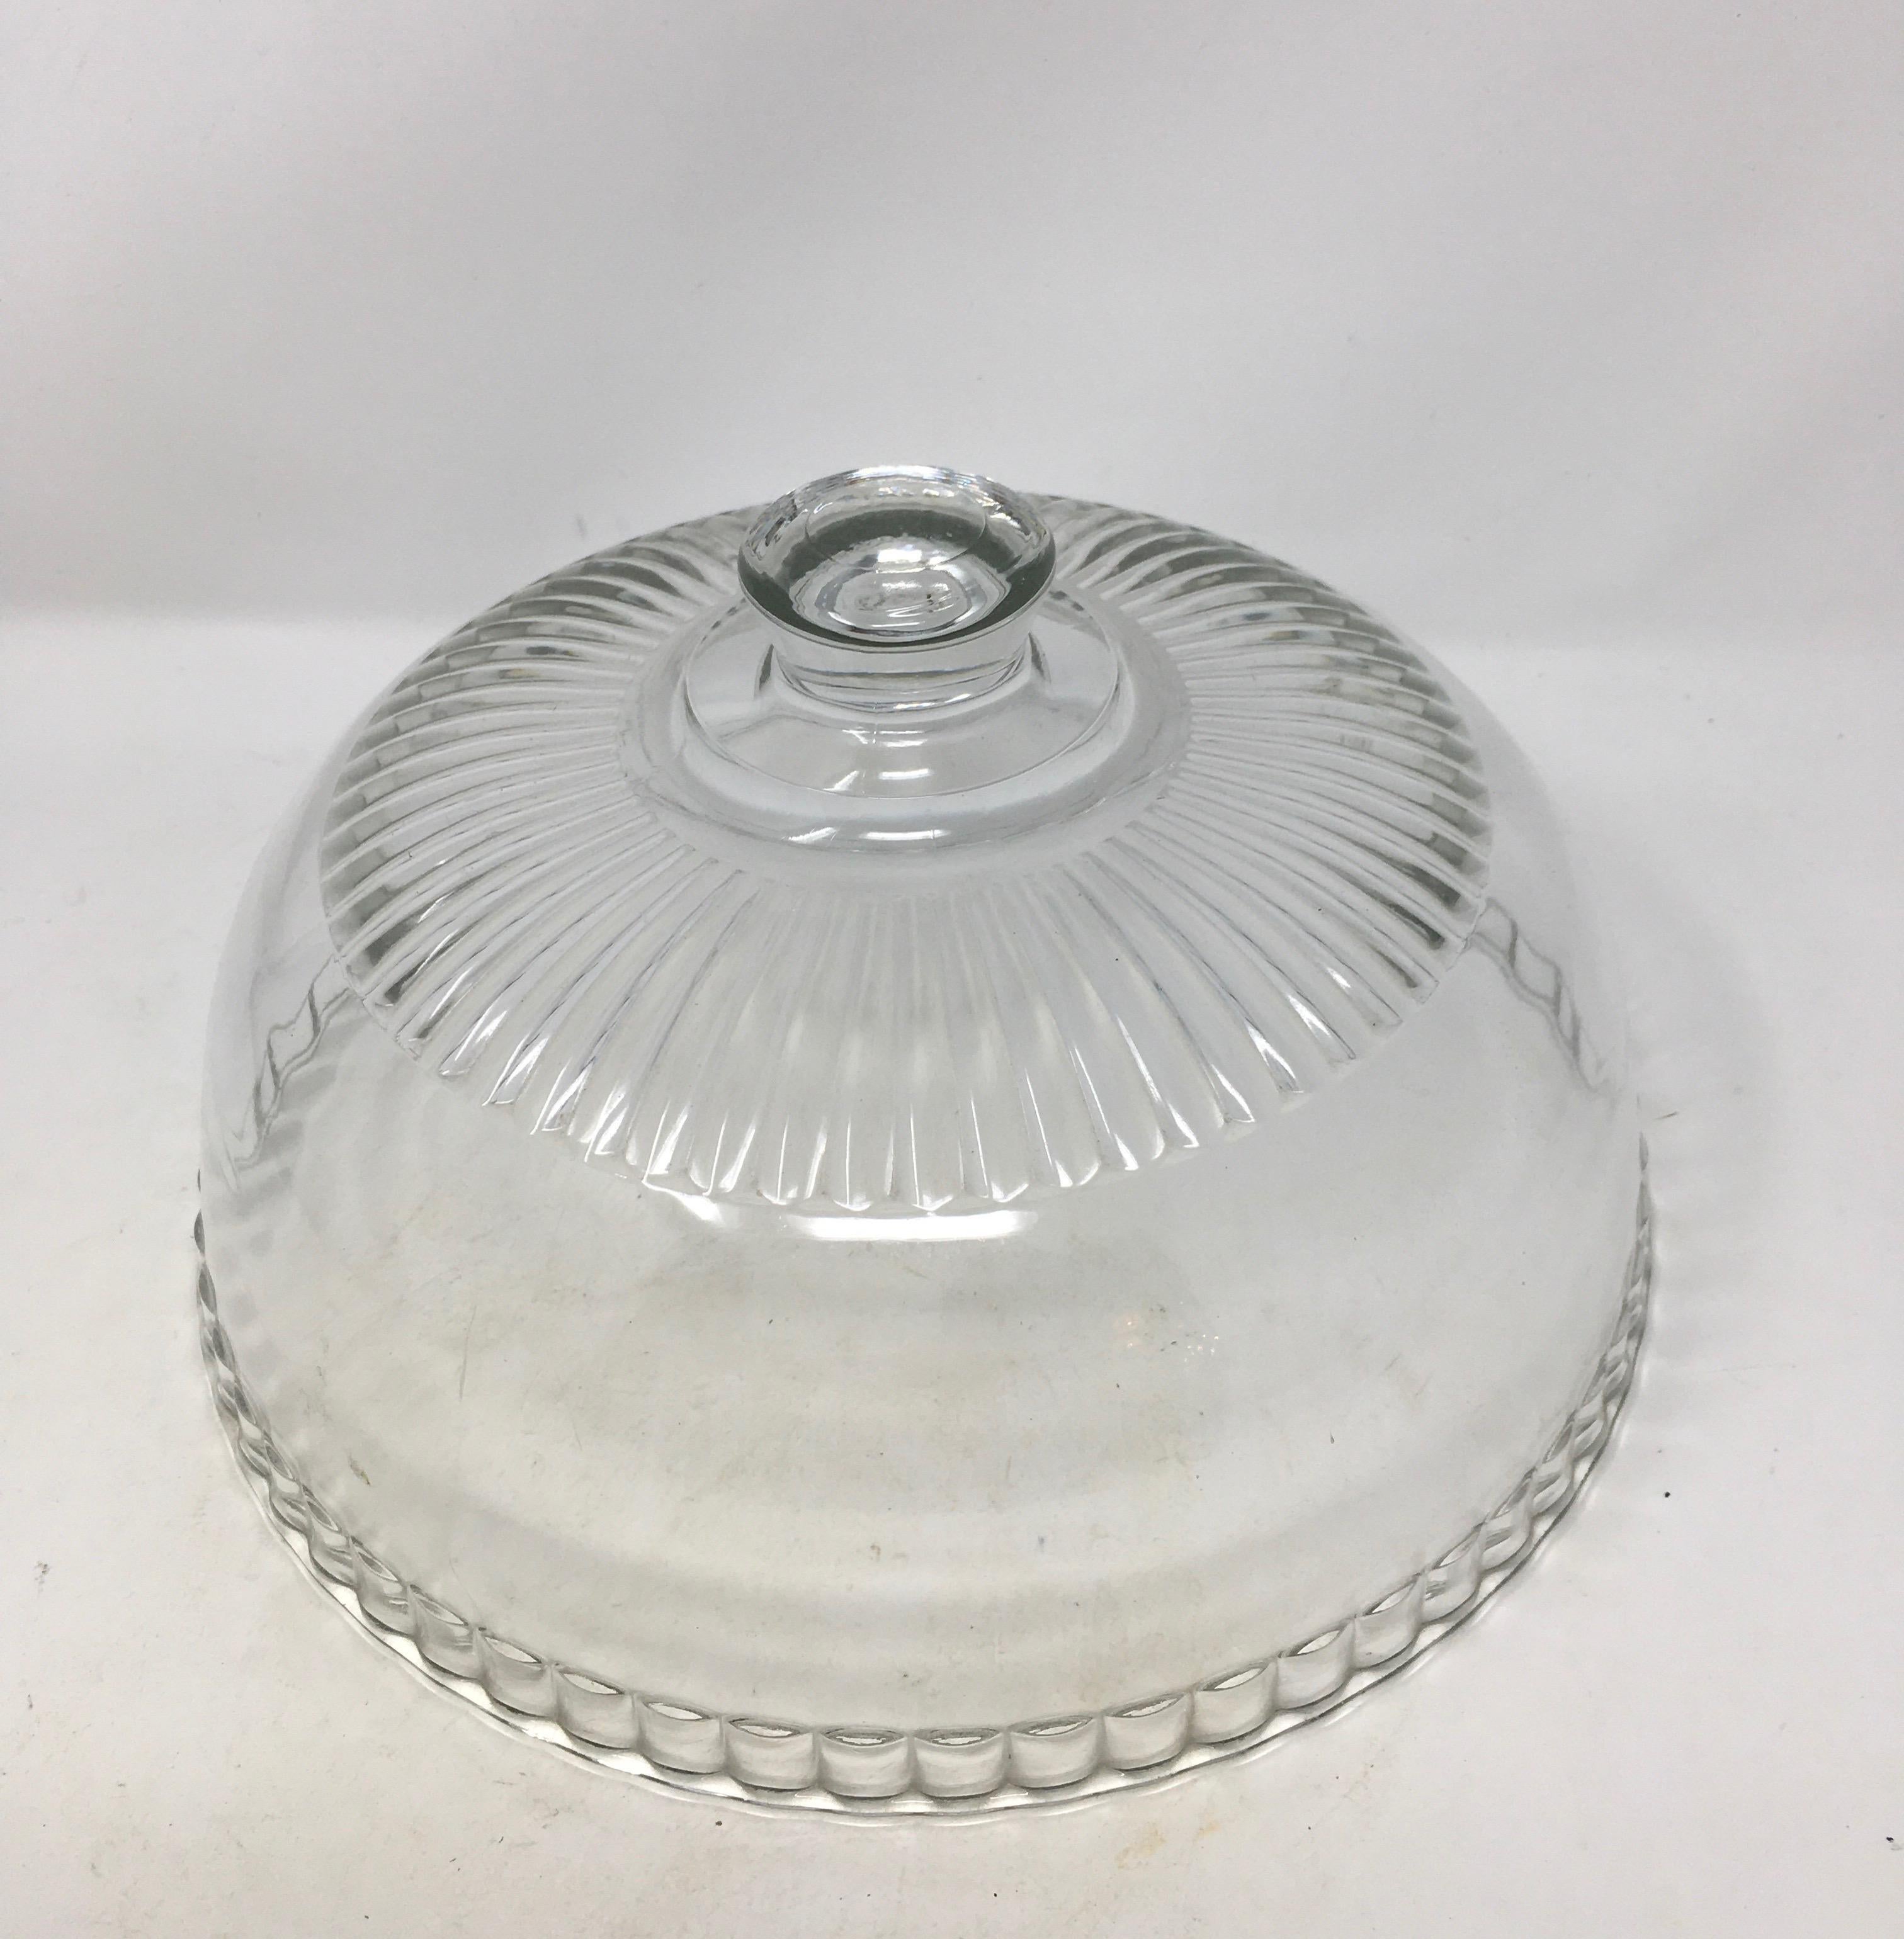 French antique glass dome cloche with a solid glass knob handle. Smooth and polished glass, these were used in French cheese shop's and patisseries to cover and display cheeses and baked goods.

This piece weighs 3.5 lbs.